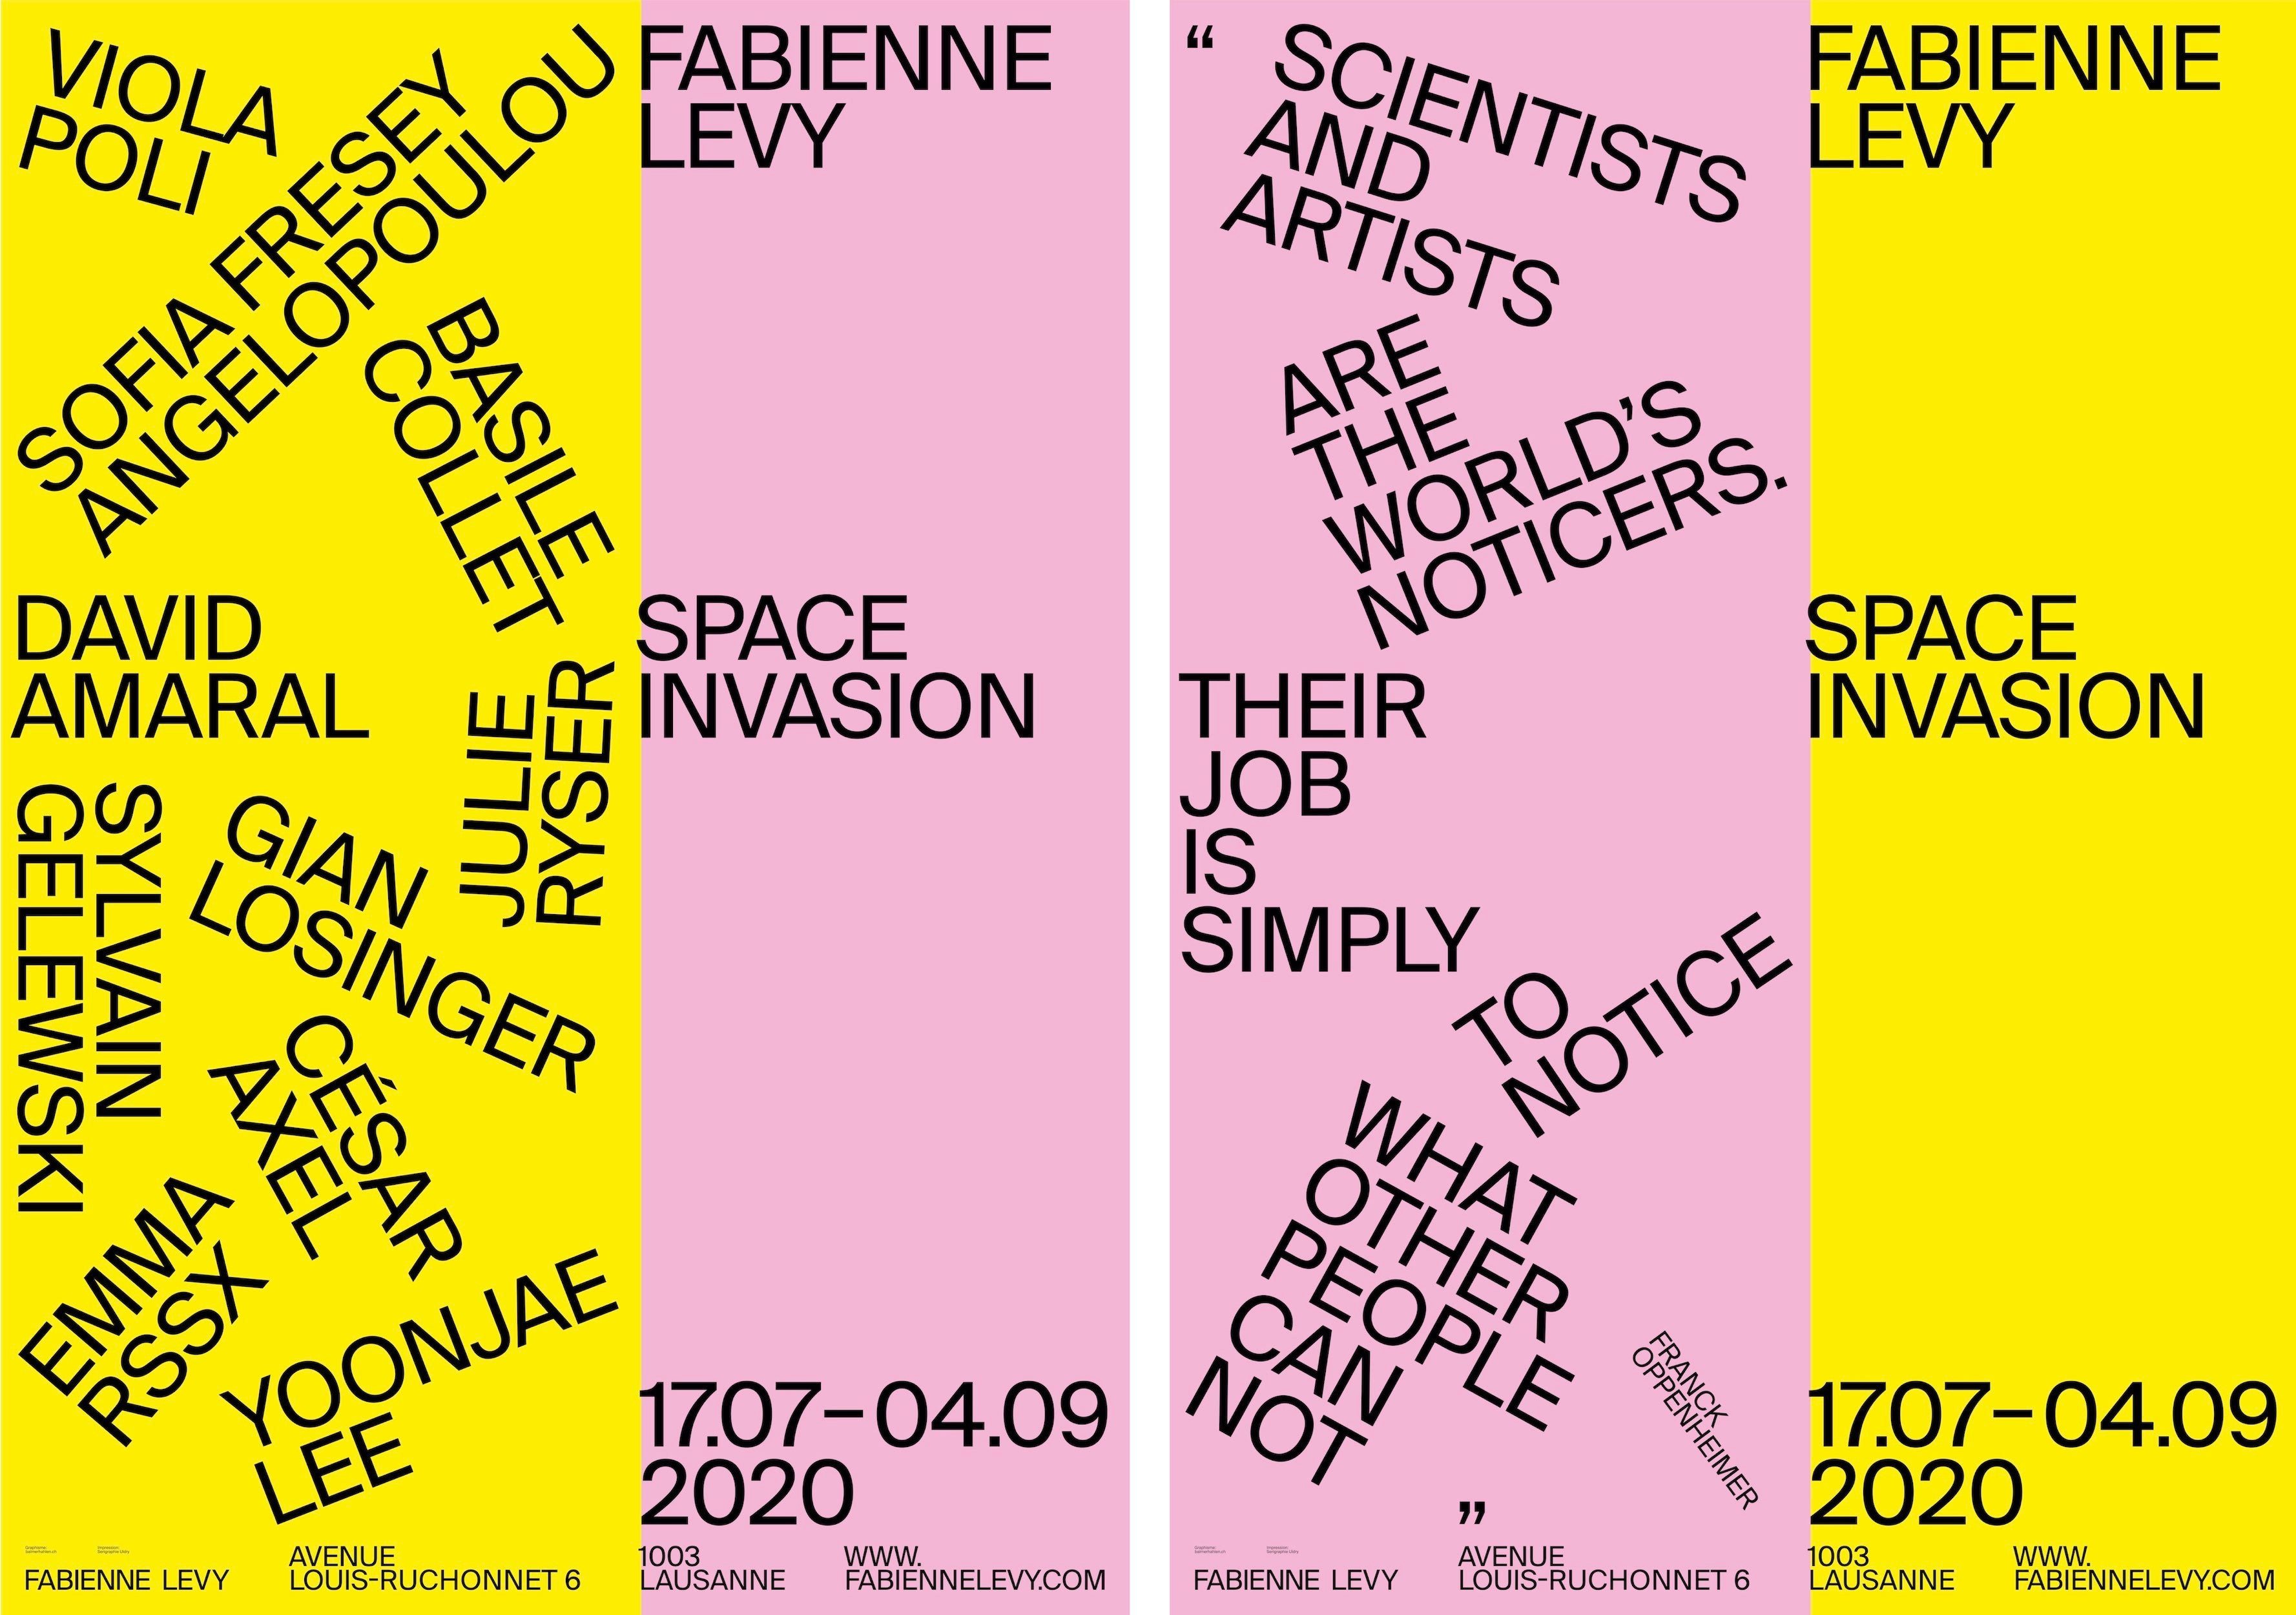 Space Invasion - Show & Statement Posters